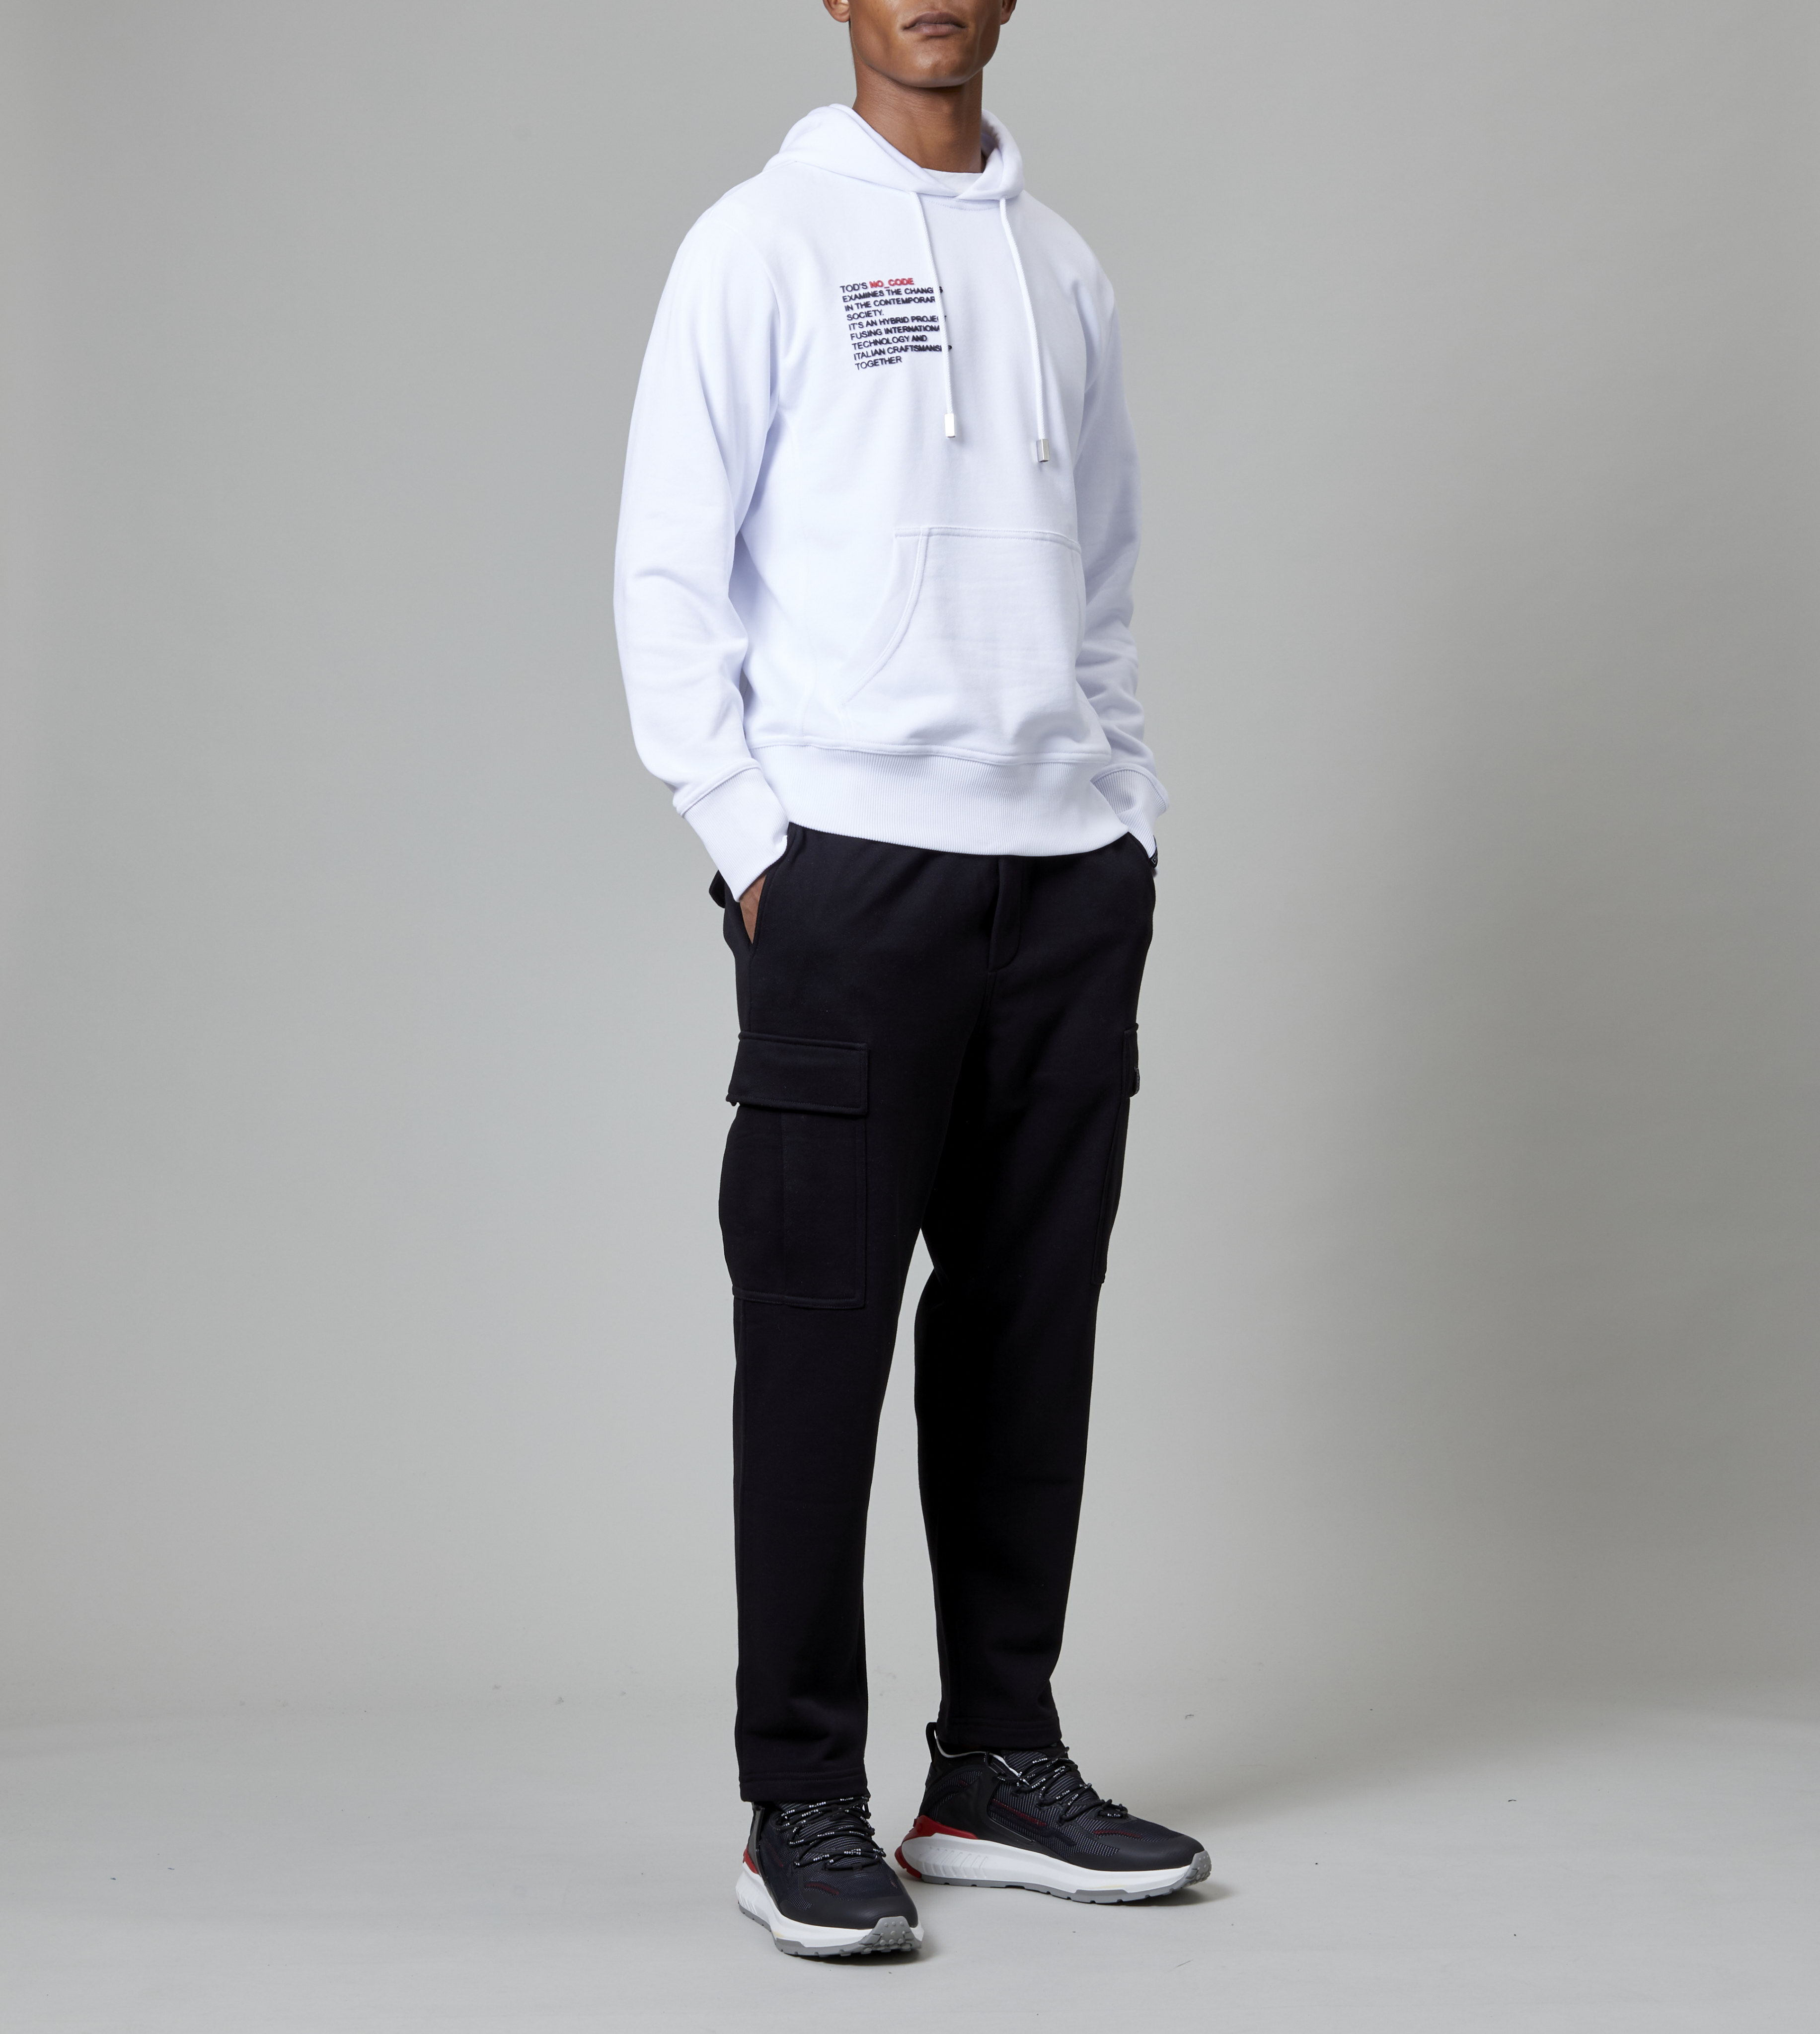 Tod’s No_Code collection hoodie was inspired by classic US university campus attire. Photos: Tod’s